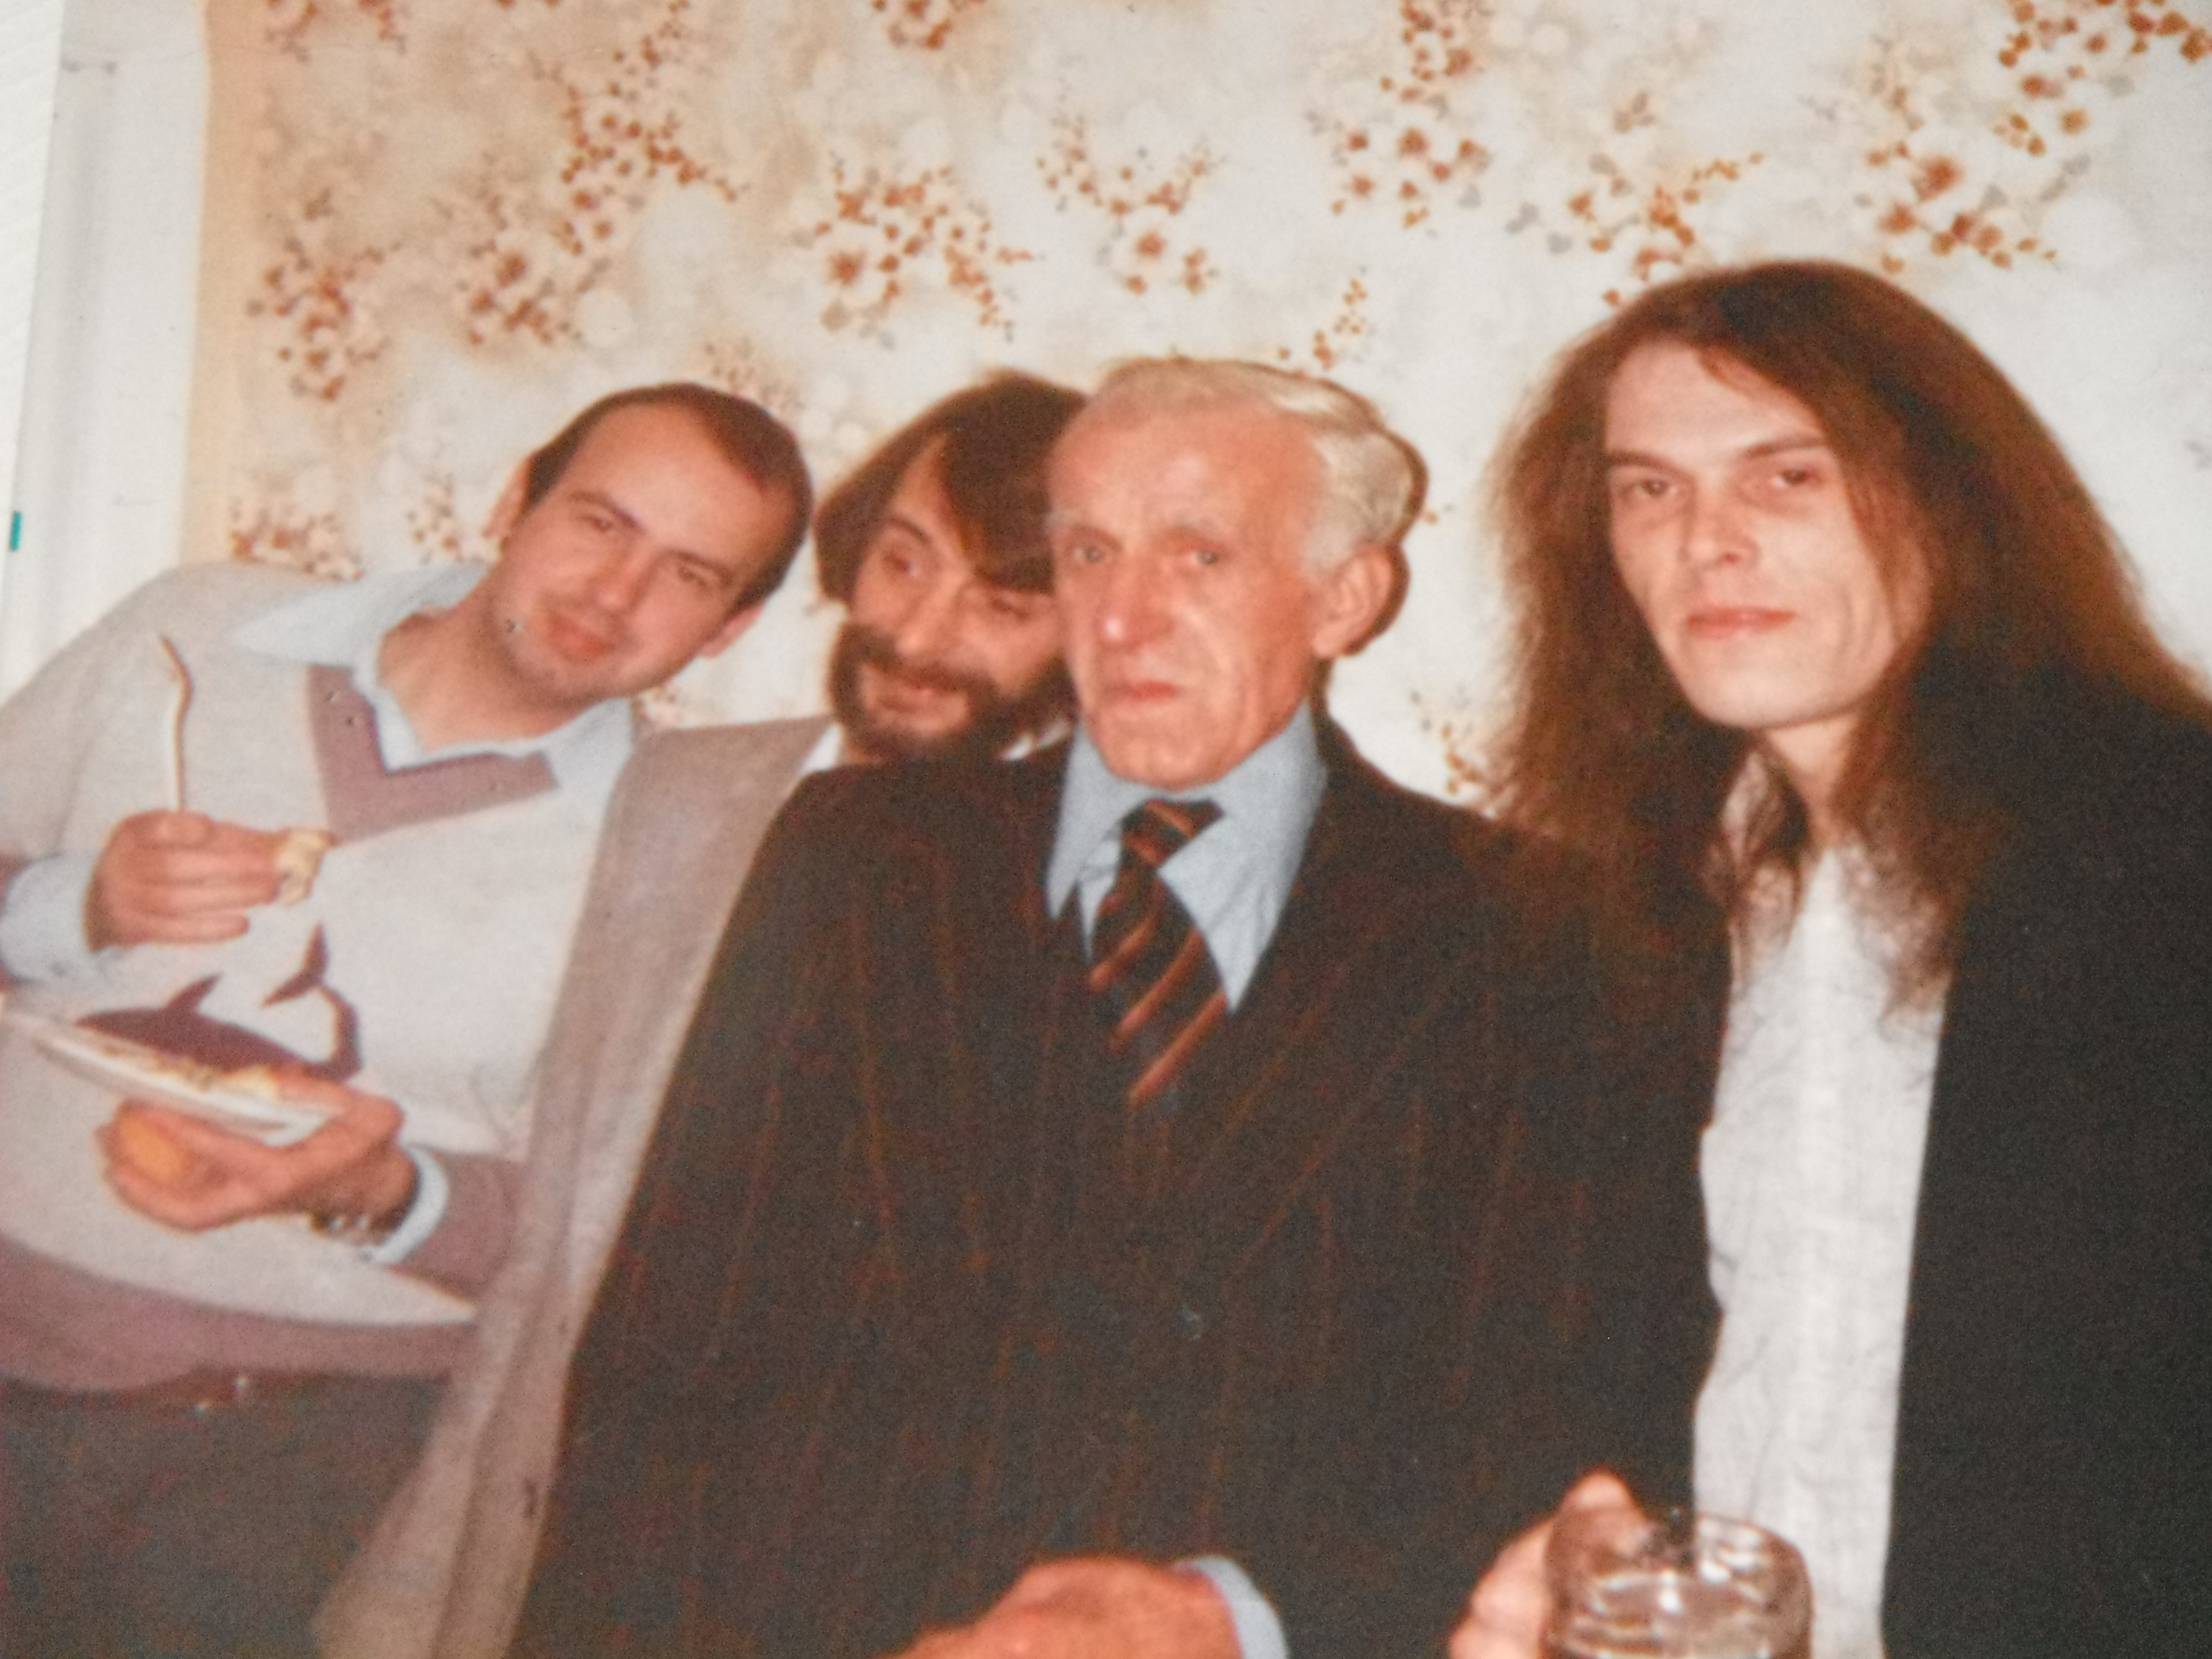 Photo tken by family - me (left)with my Mum&#039;s dad and two of my uncles, all except me now sadly deceased